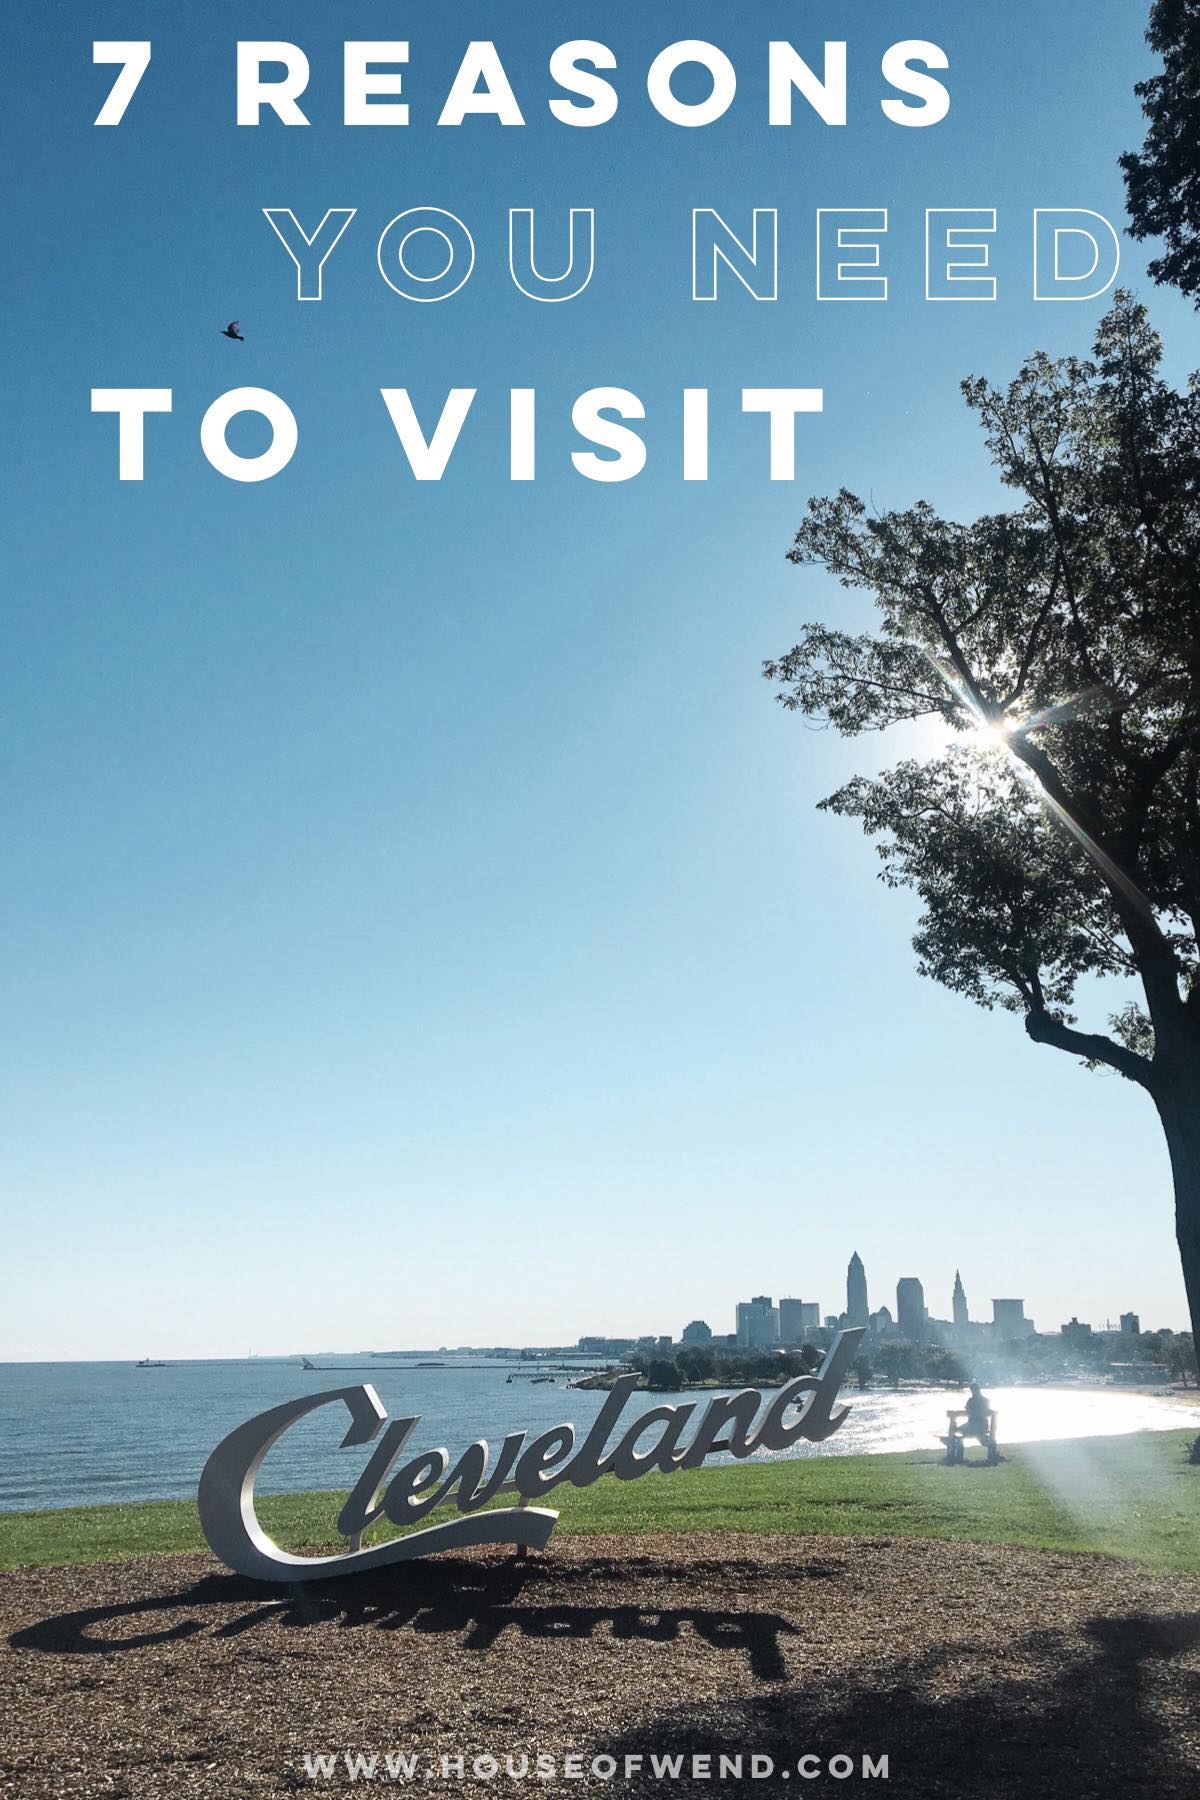 Seven reasons why you need to visit Cleveland, Ohio